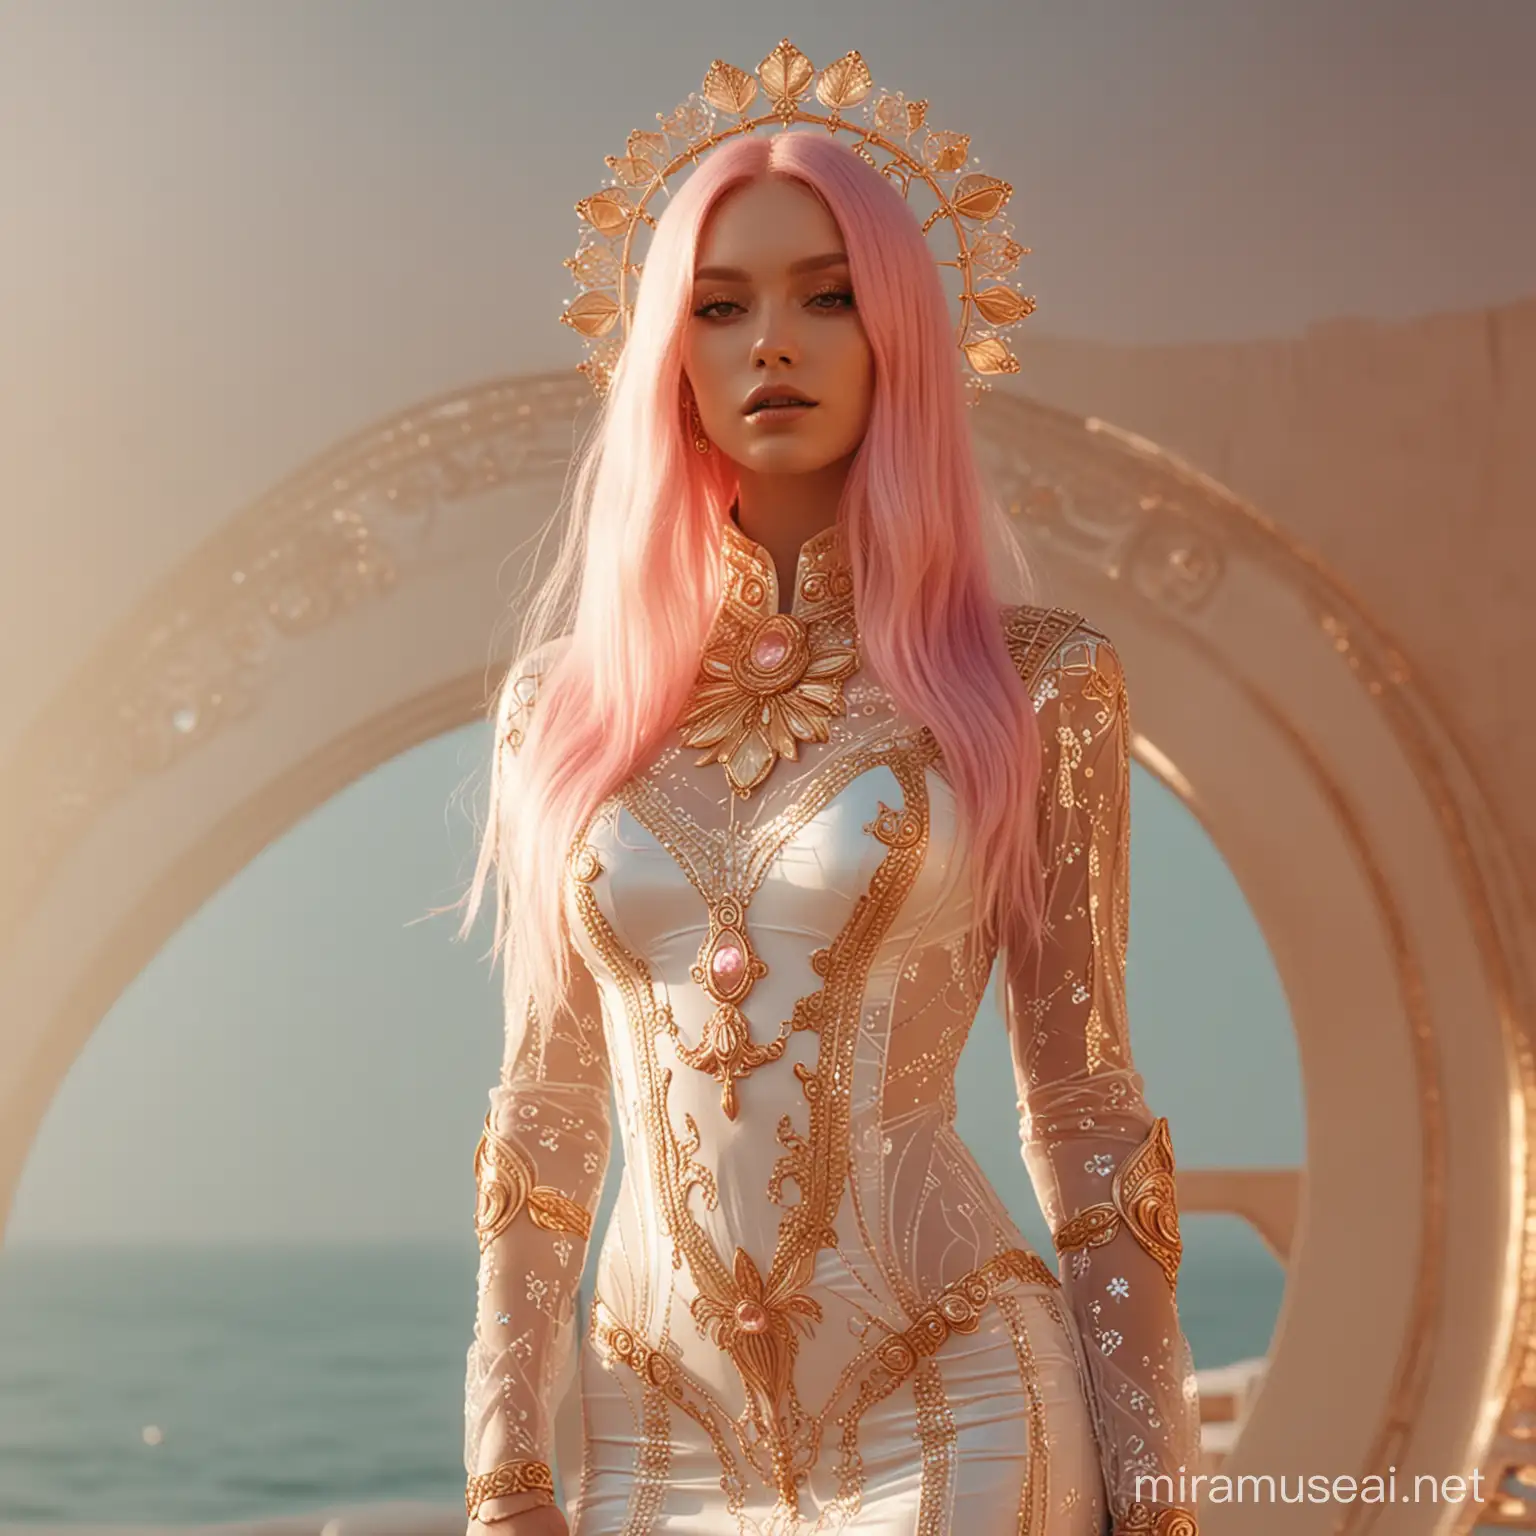 futuristic goddess, gorgeous, ornate epic, fantasy, in floaty futuristic minimalistic white and gold semi-transparent mermaid nylon dress and headwear, ethereal long pink hair, edgy metal hair-clips, golden hour light, mandala, full body, in the style of Gucci, highly detailed, movie quality